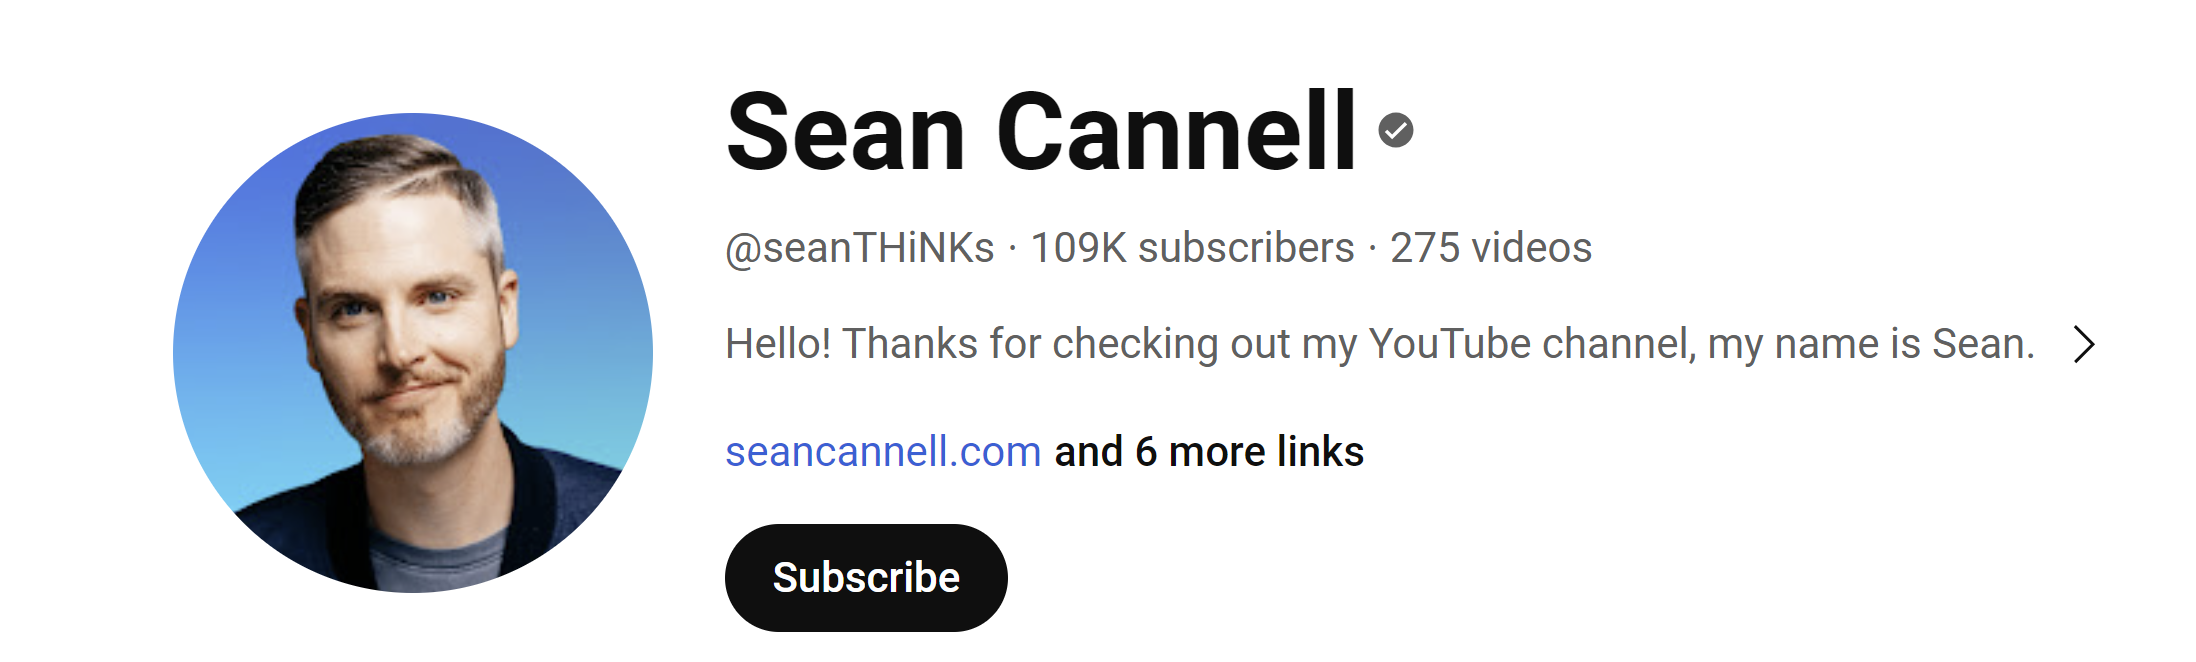 Who Is Sean Cannell